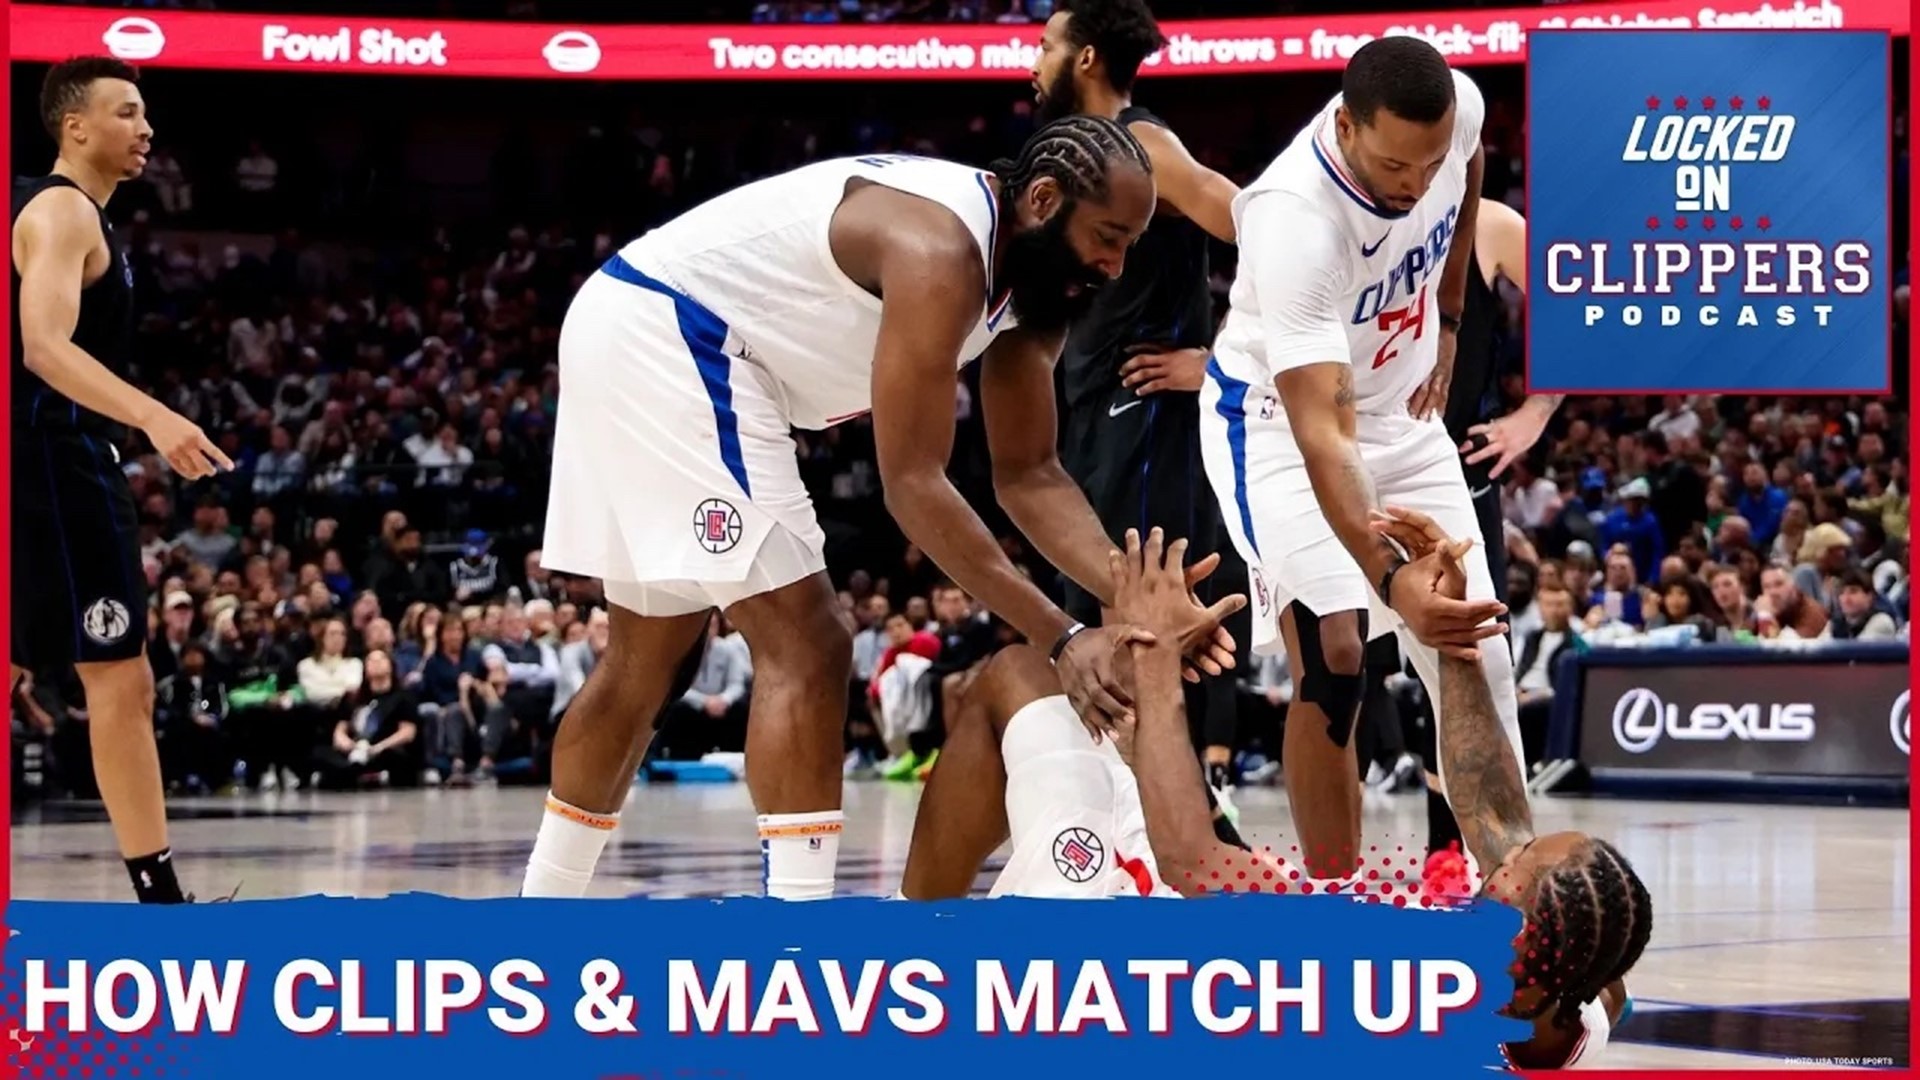 Darian Vaziri and Nick Angstadt collaborate for a crossover episode previewing the first-round series between the Dallas Mavericks and LA Clippers (part two).